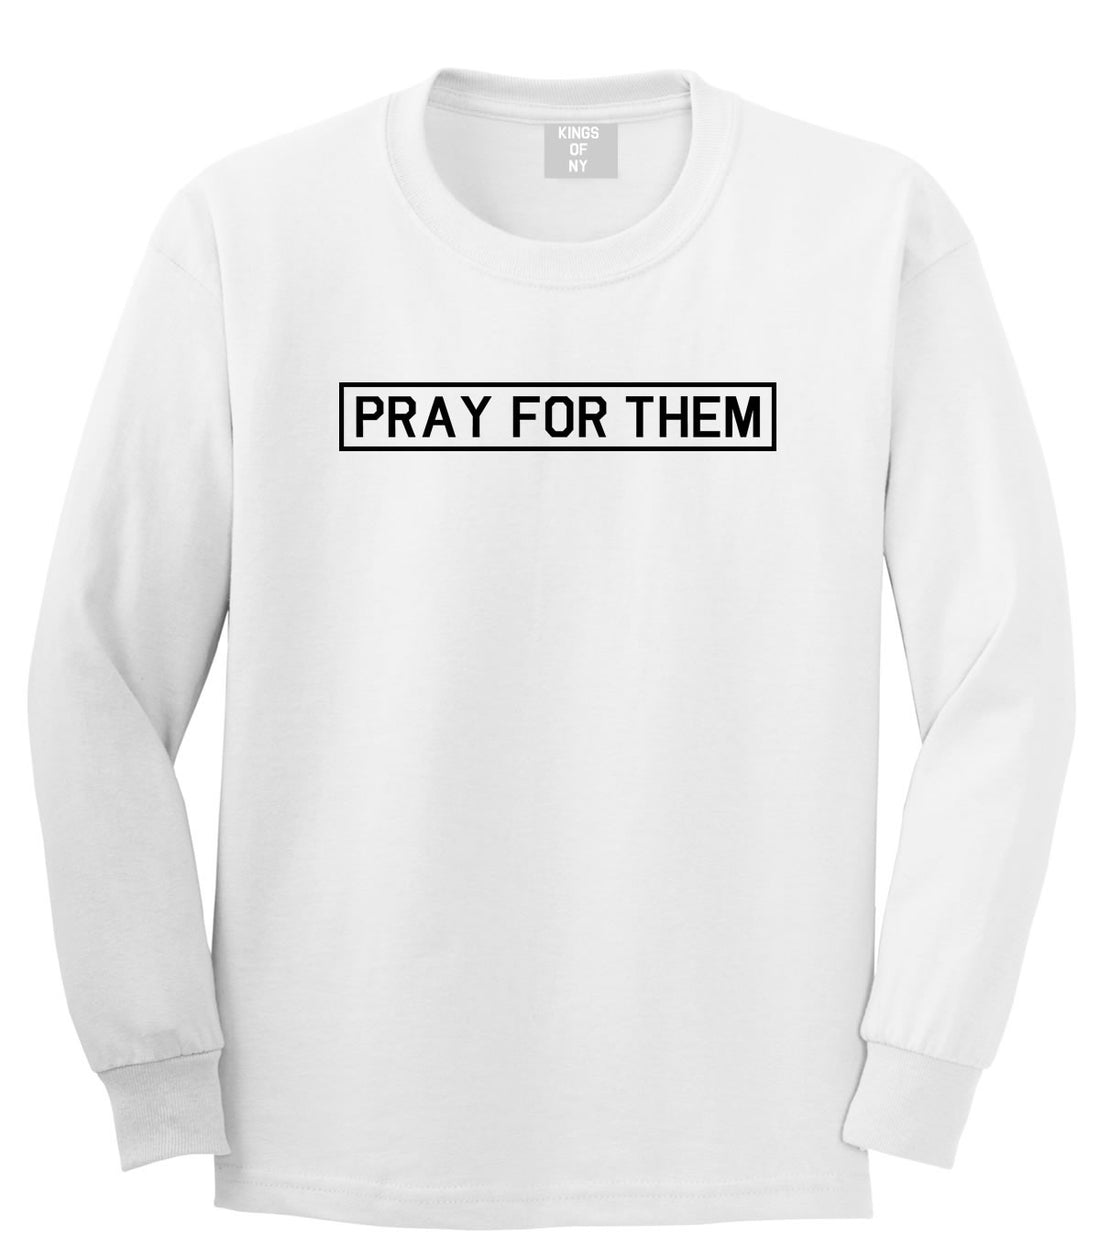 Pray For Them Fall15 Boys Kids Long Sleeve T-Shirt in White by Kings Of NY